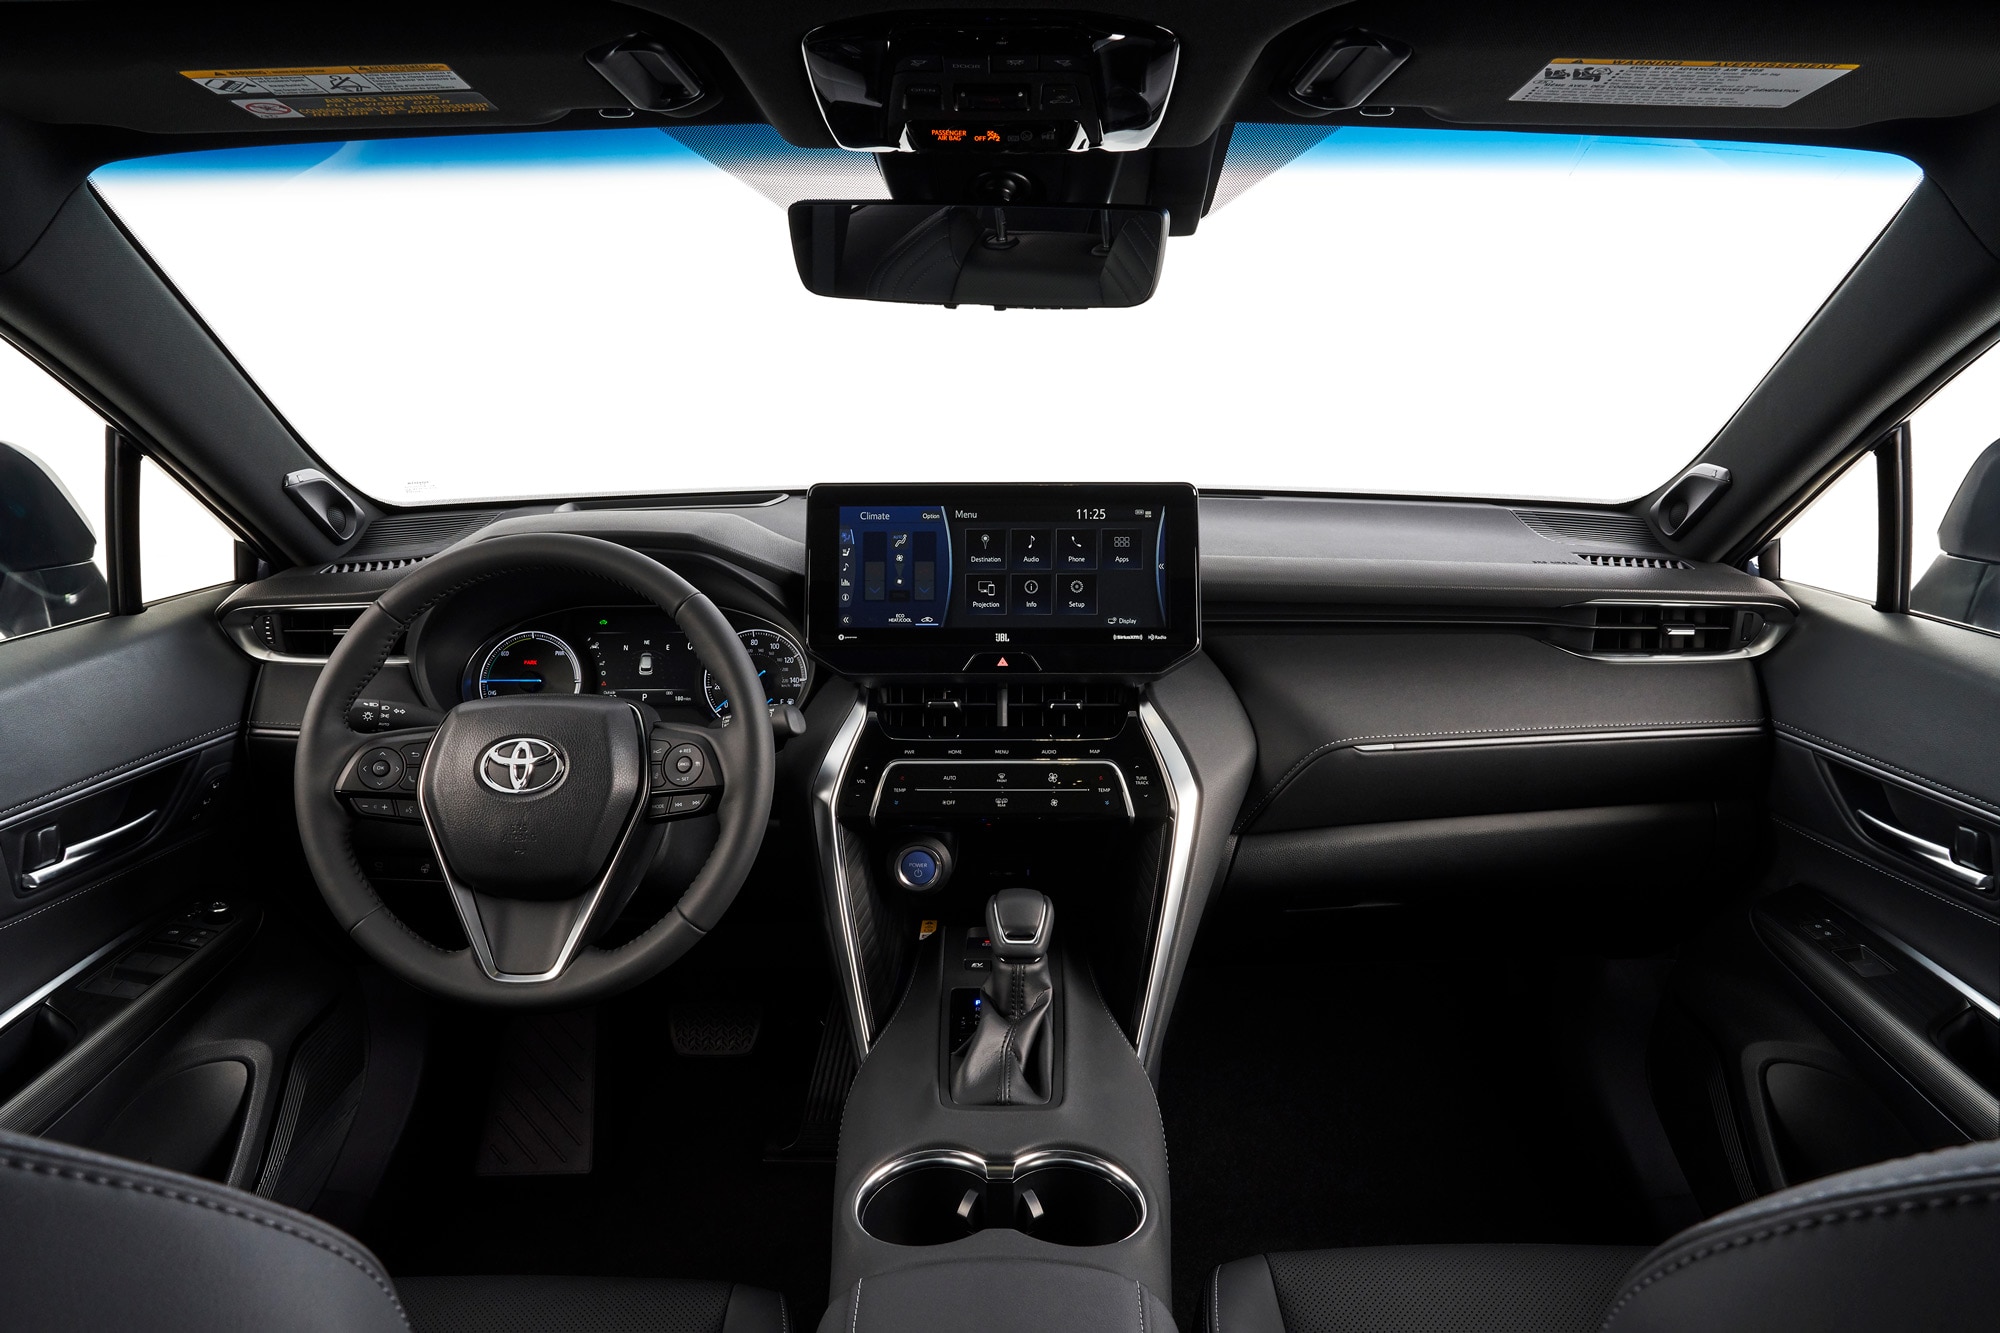  Dashboard and steering wheel of a 2023 Toyota Venza SUV